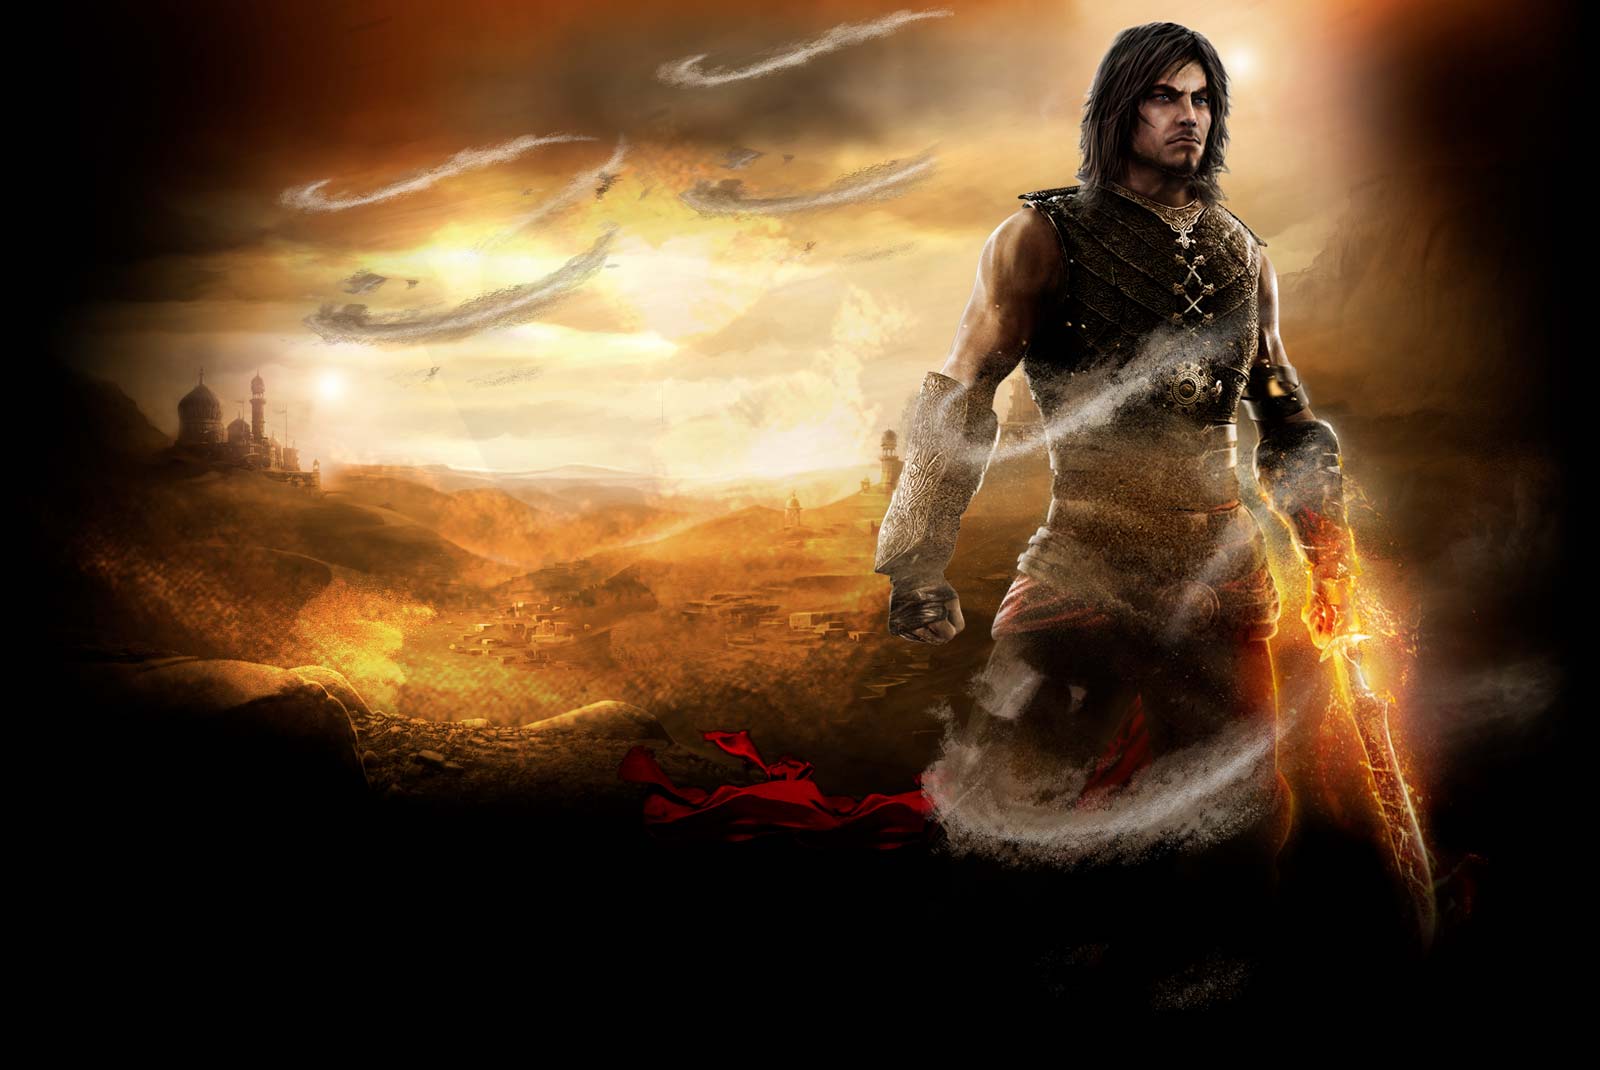 Free Wallpapers Prince Of Persia - Wallpaper Cave